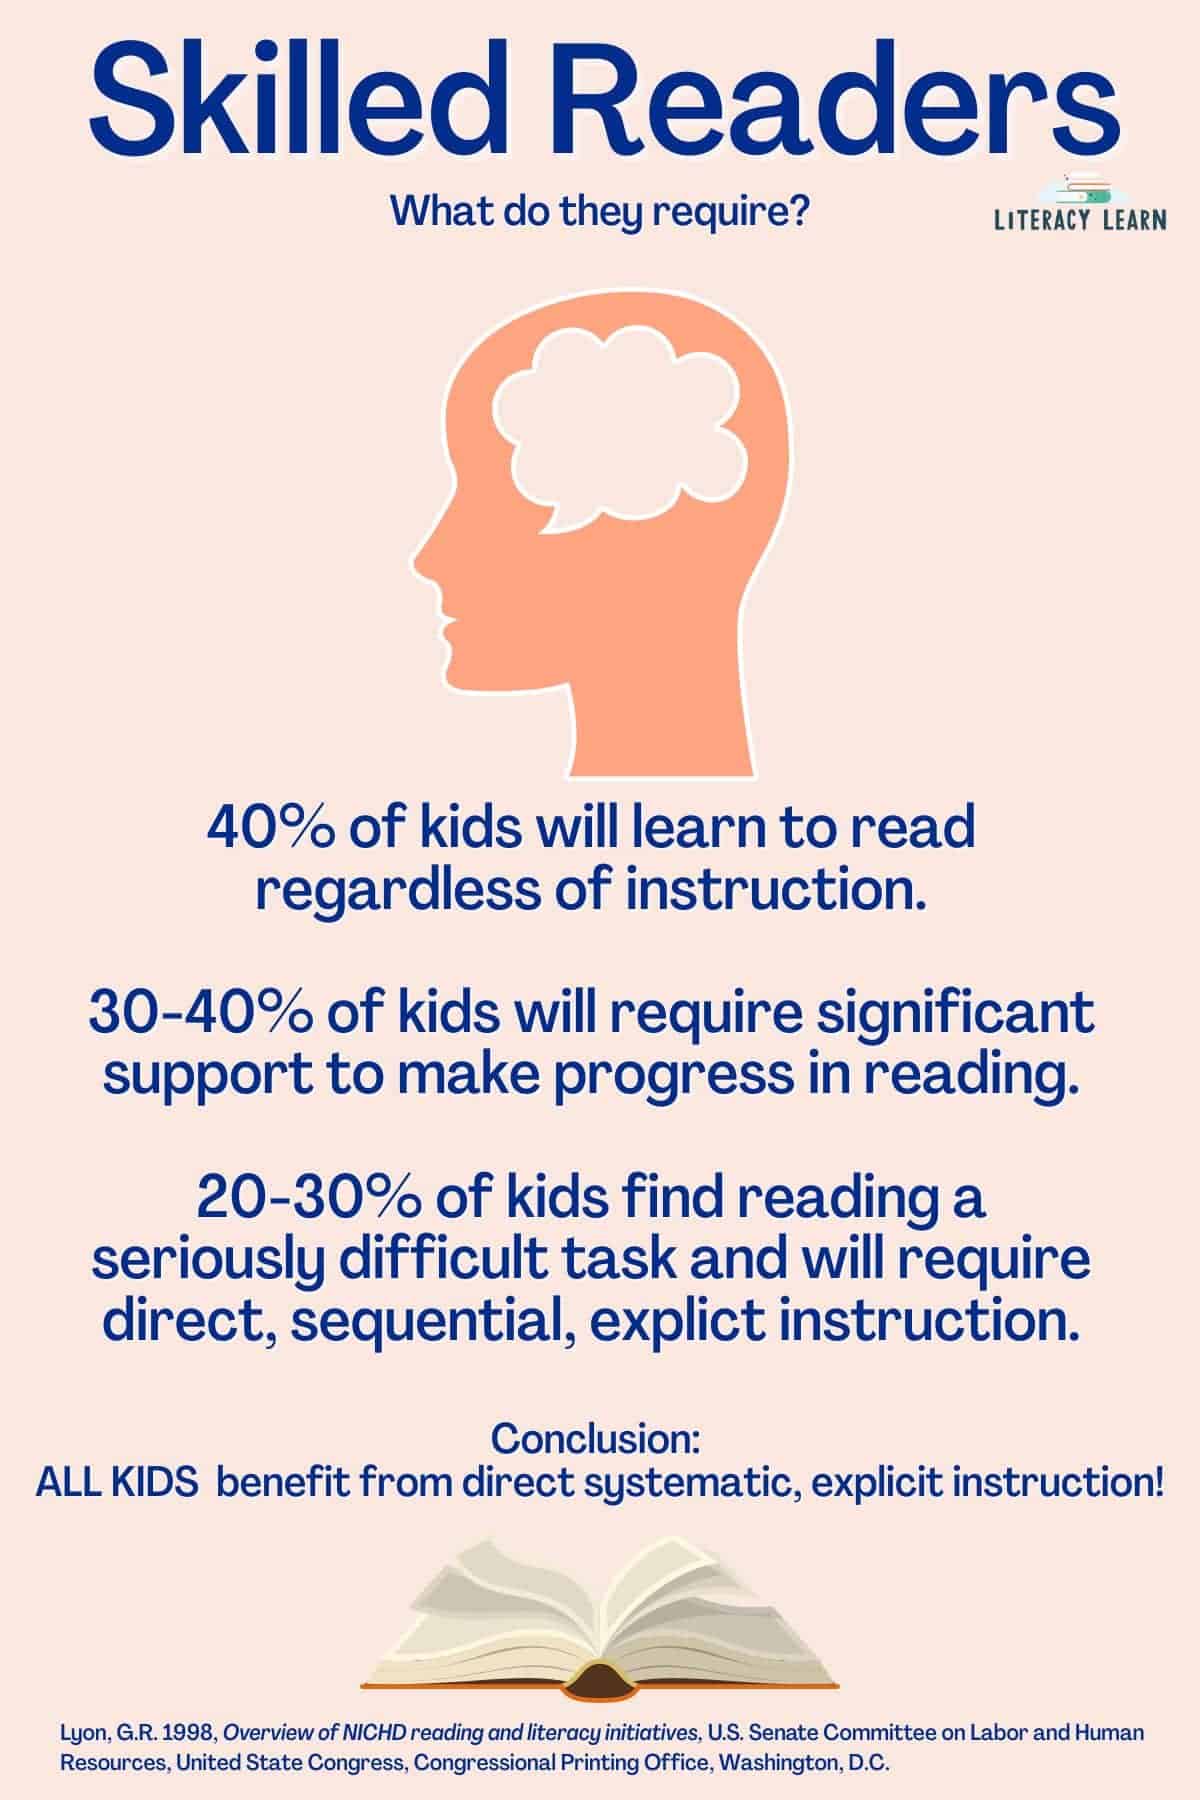 Graphic showing the type of instruction skilled readers require with statistics from a research study.